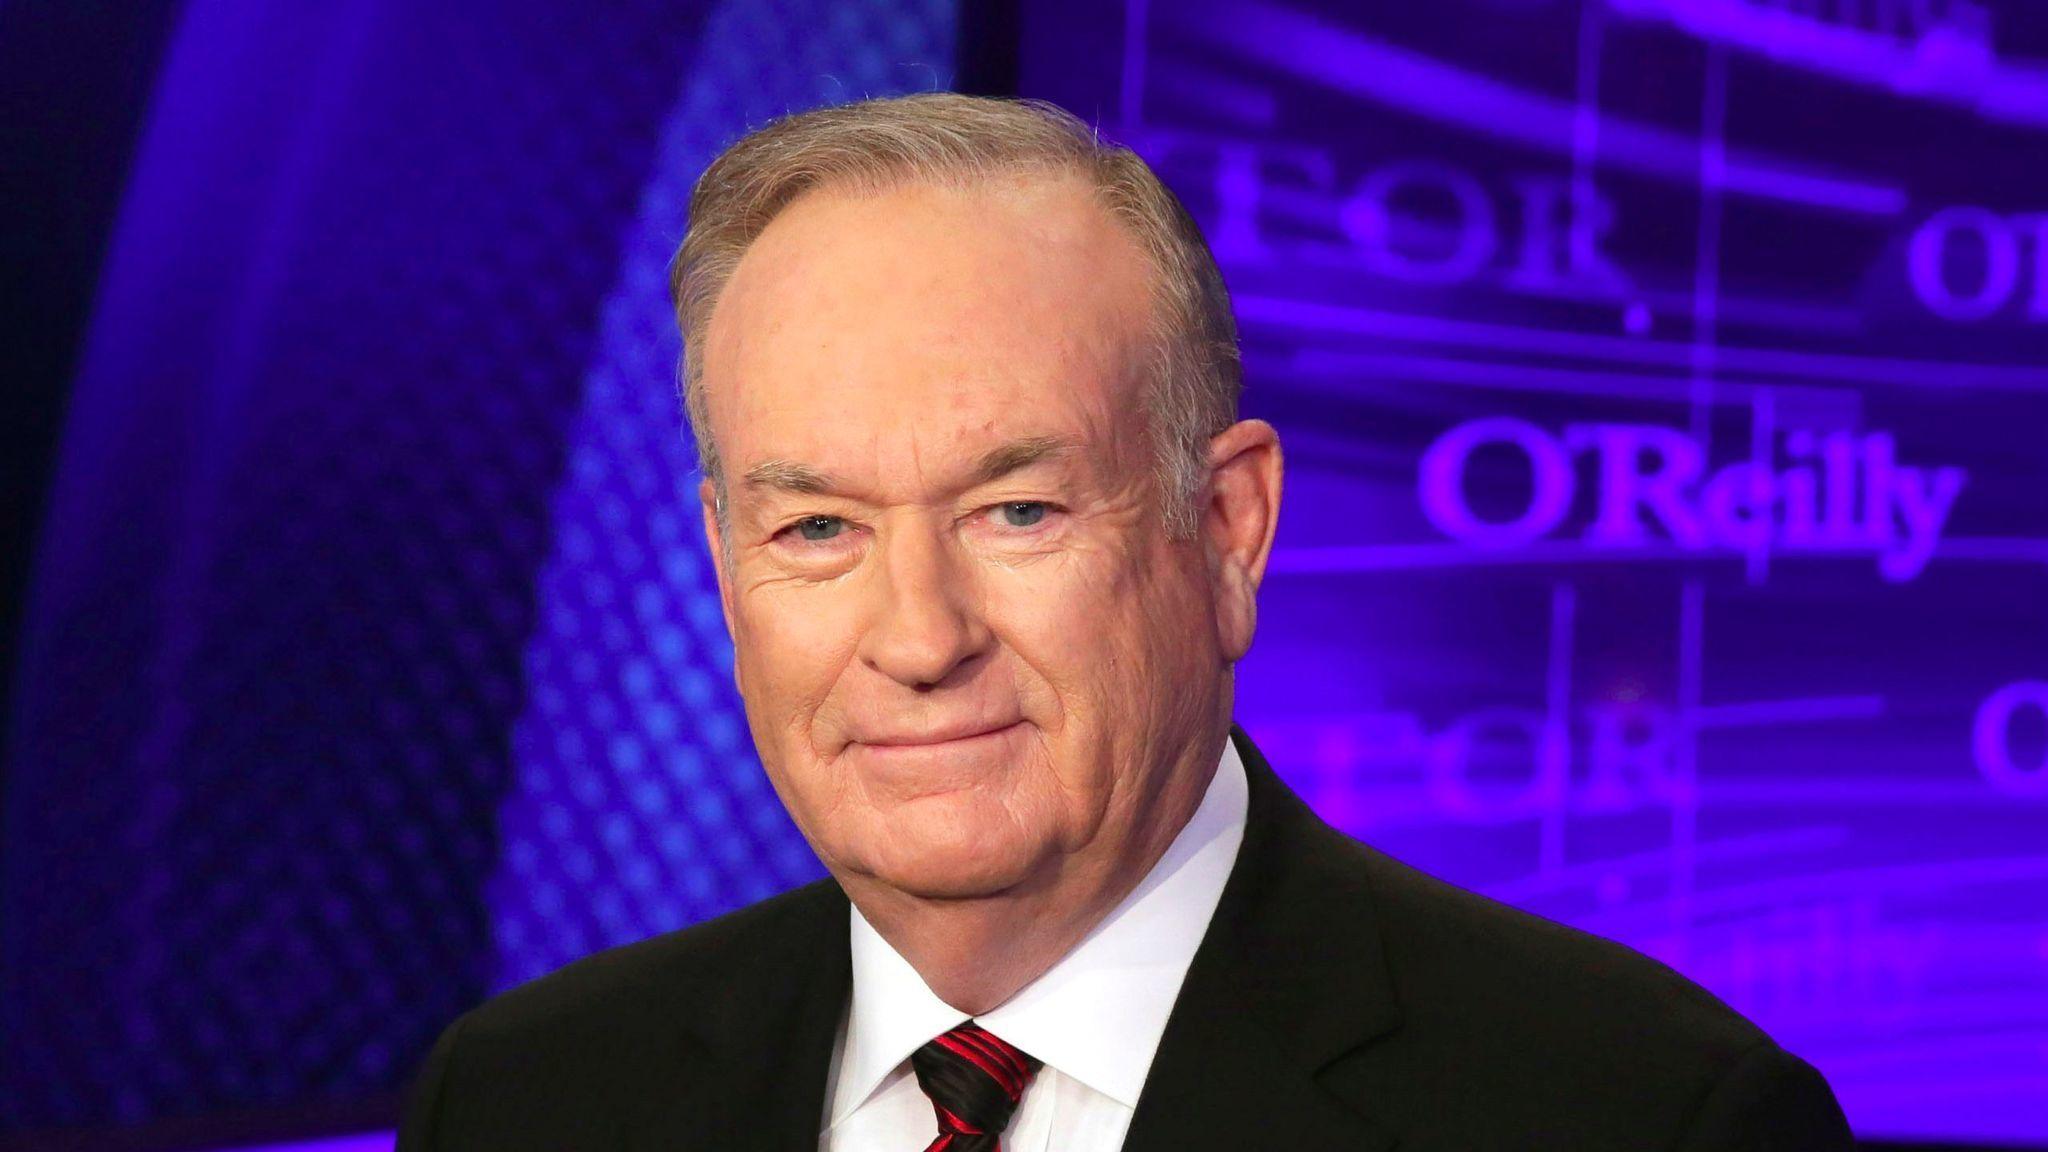 Pitts: Let's talk about Bill O'Reilly and insults